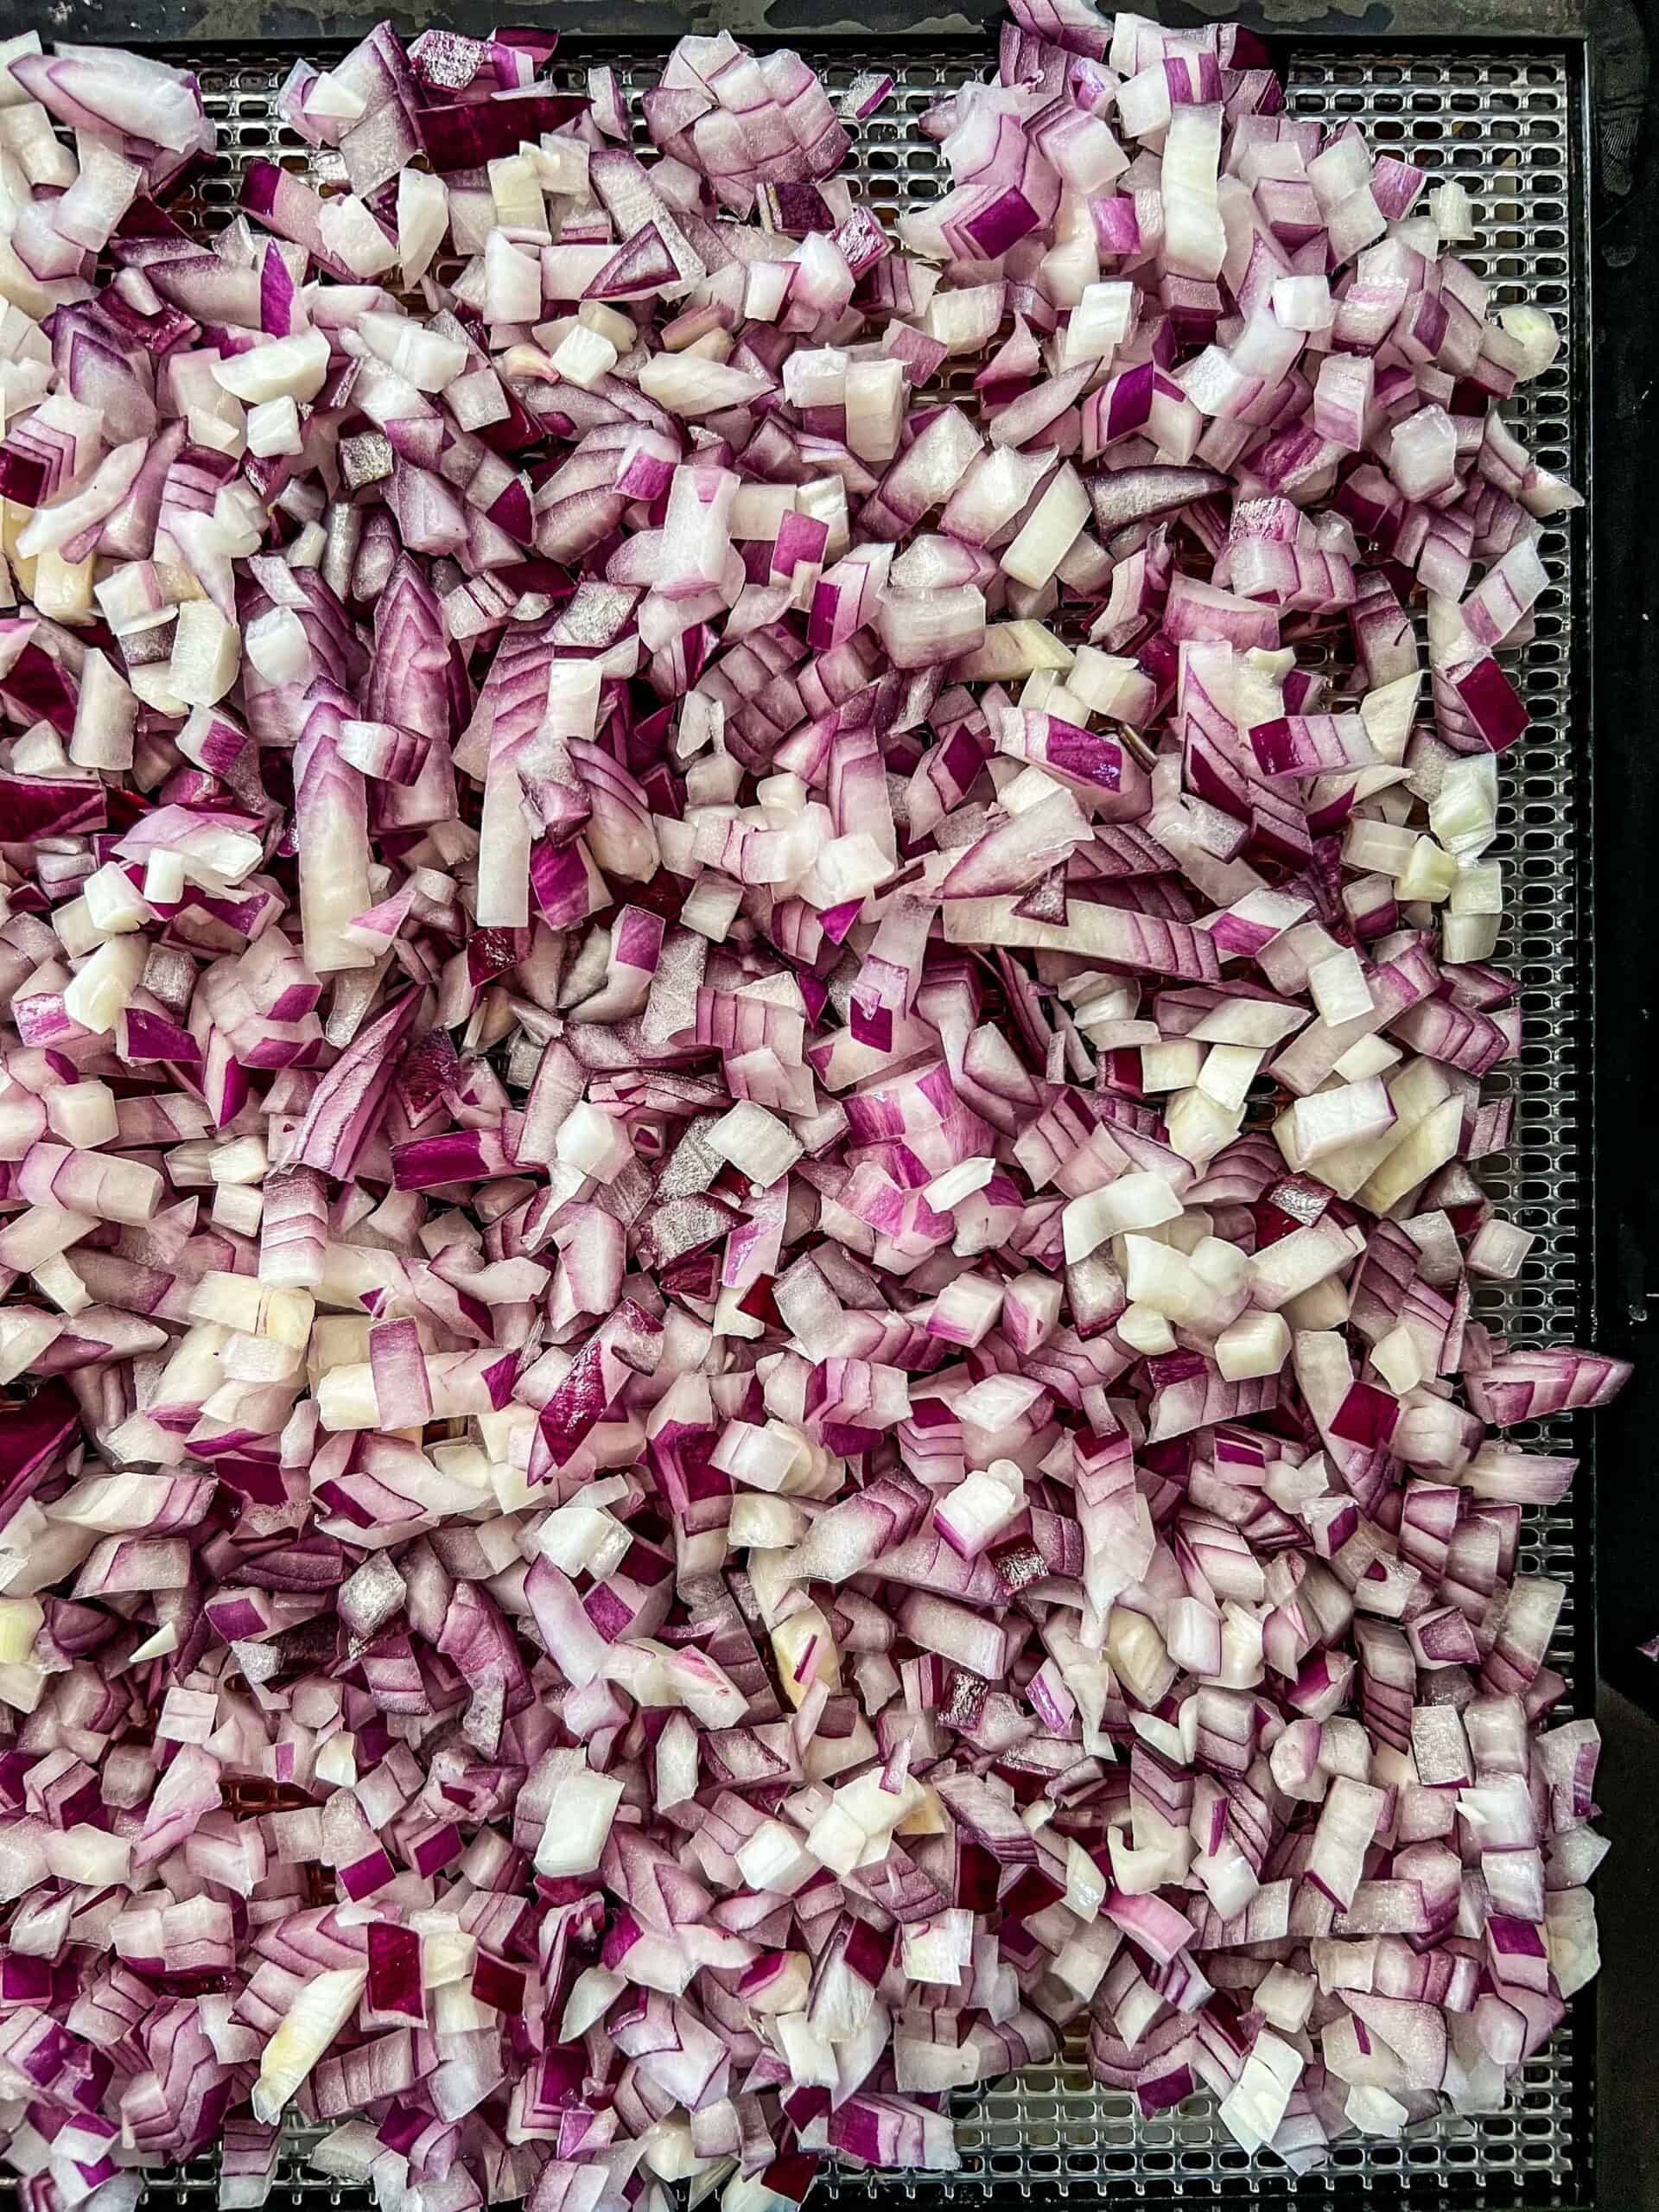 Finely diced onions on an excalibur dehydrator tray.